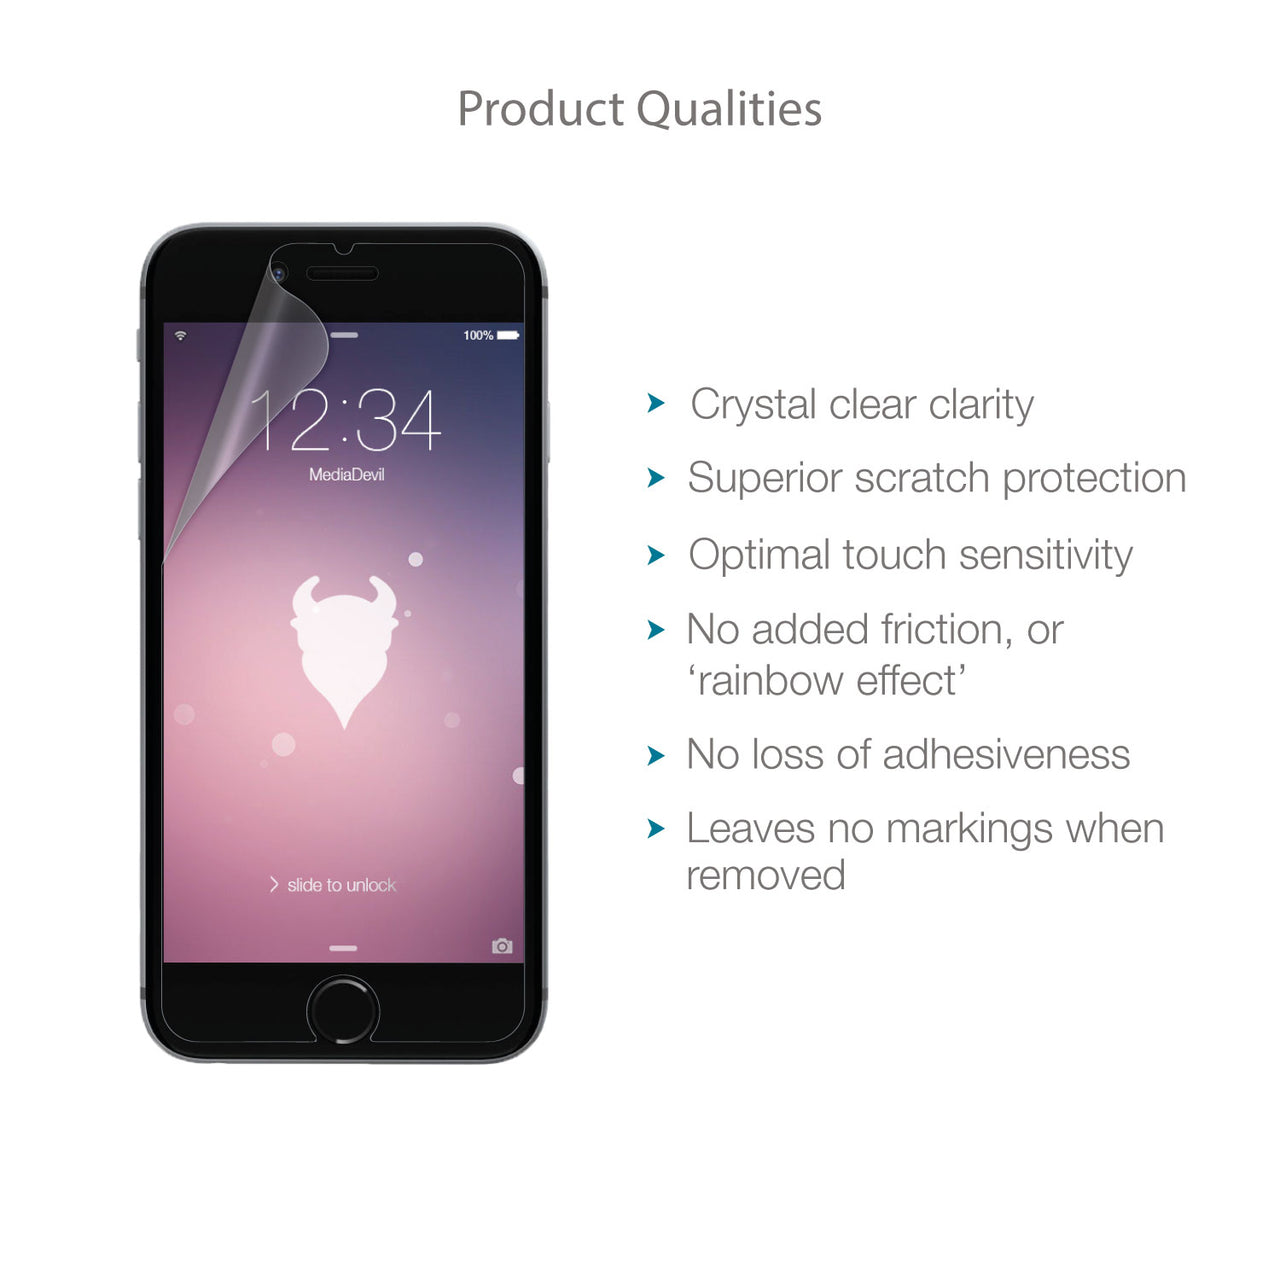 Apple iPhone 6 / 6s Screen Protector (Ultra-Tough, Glass-Free)